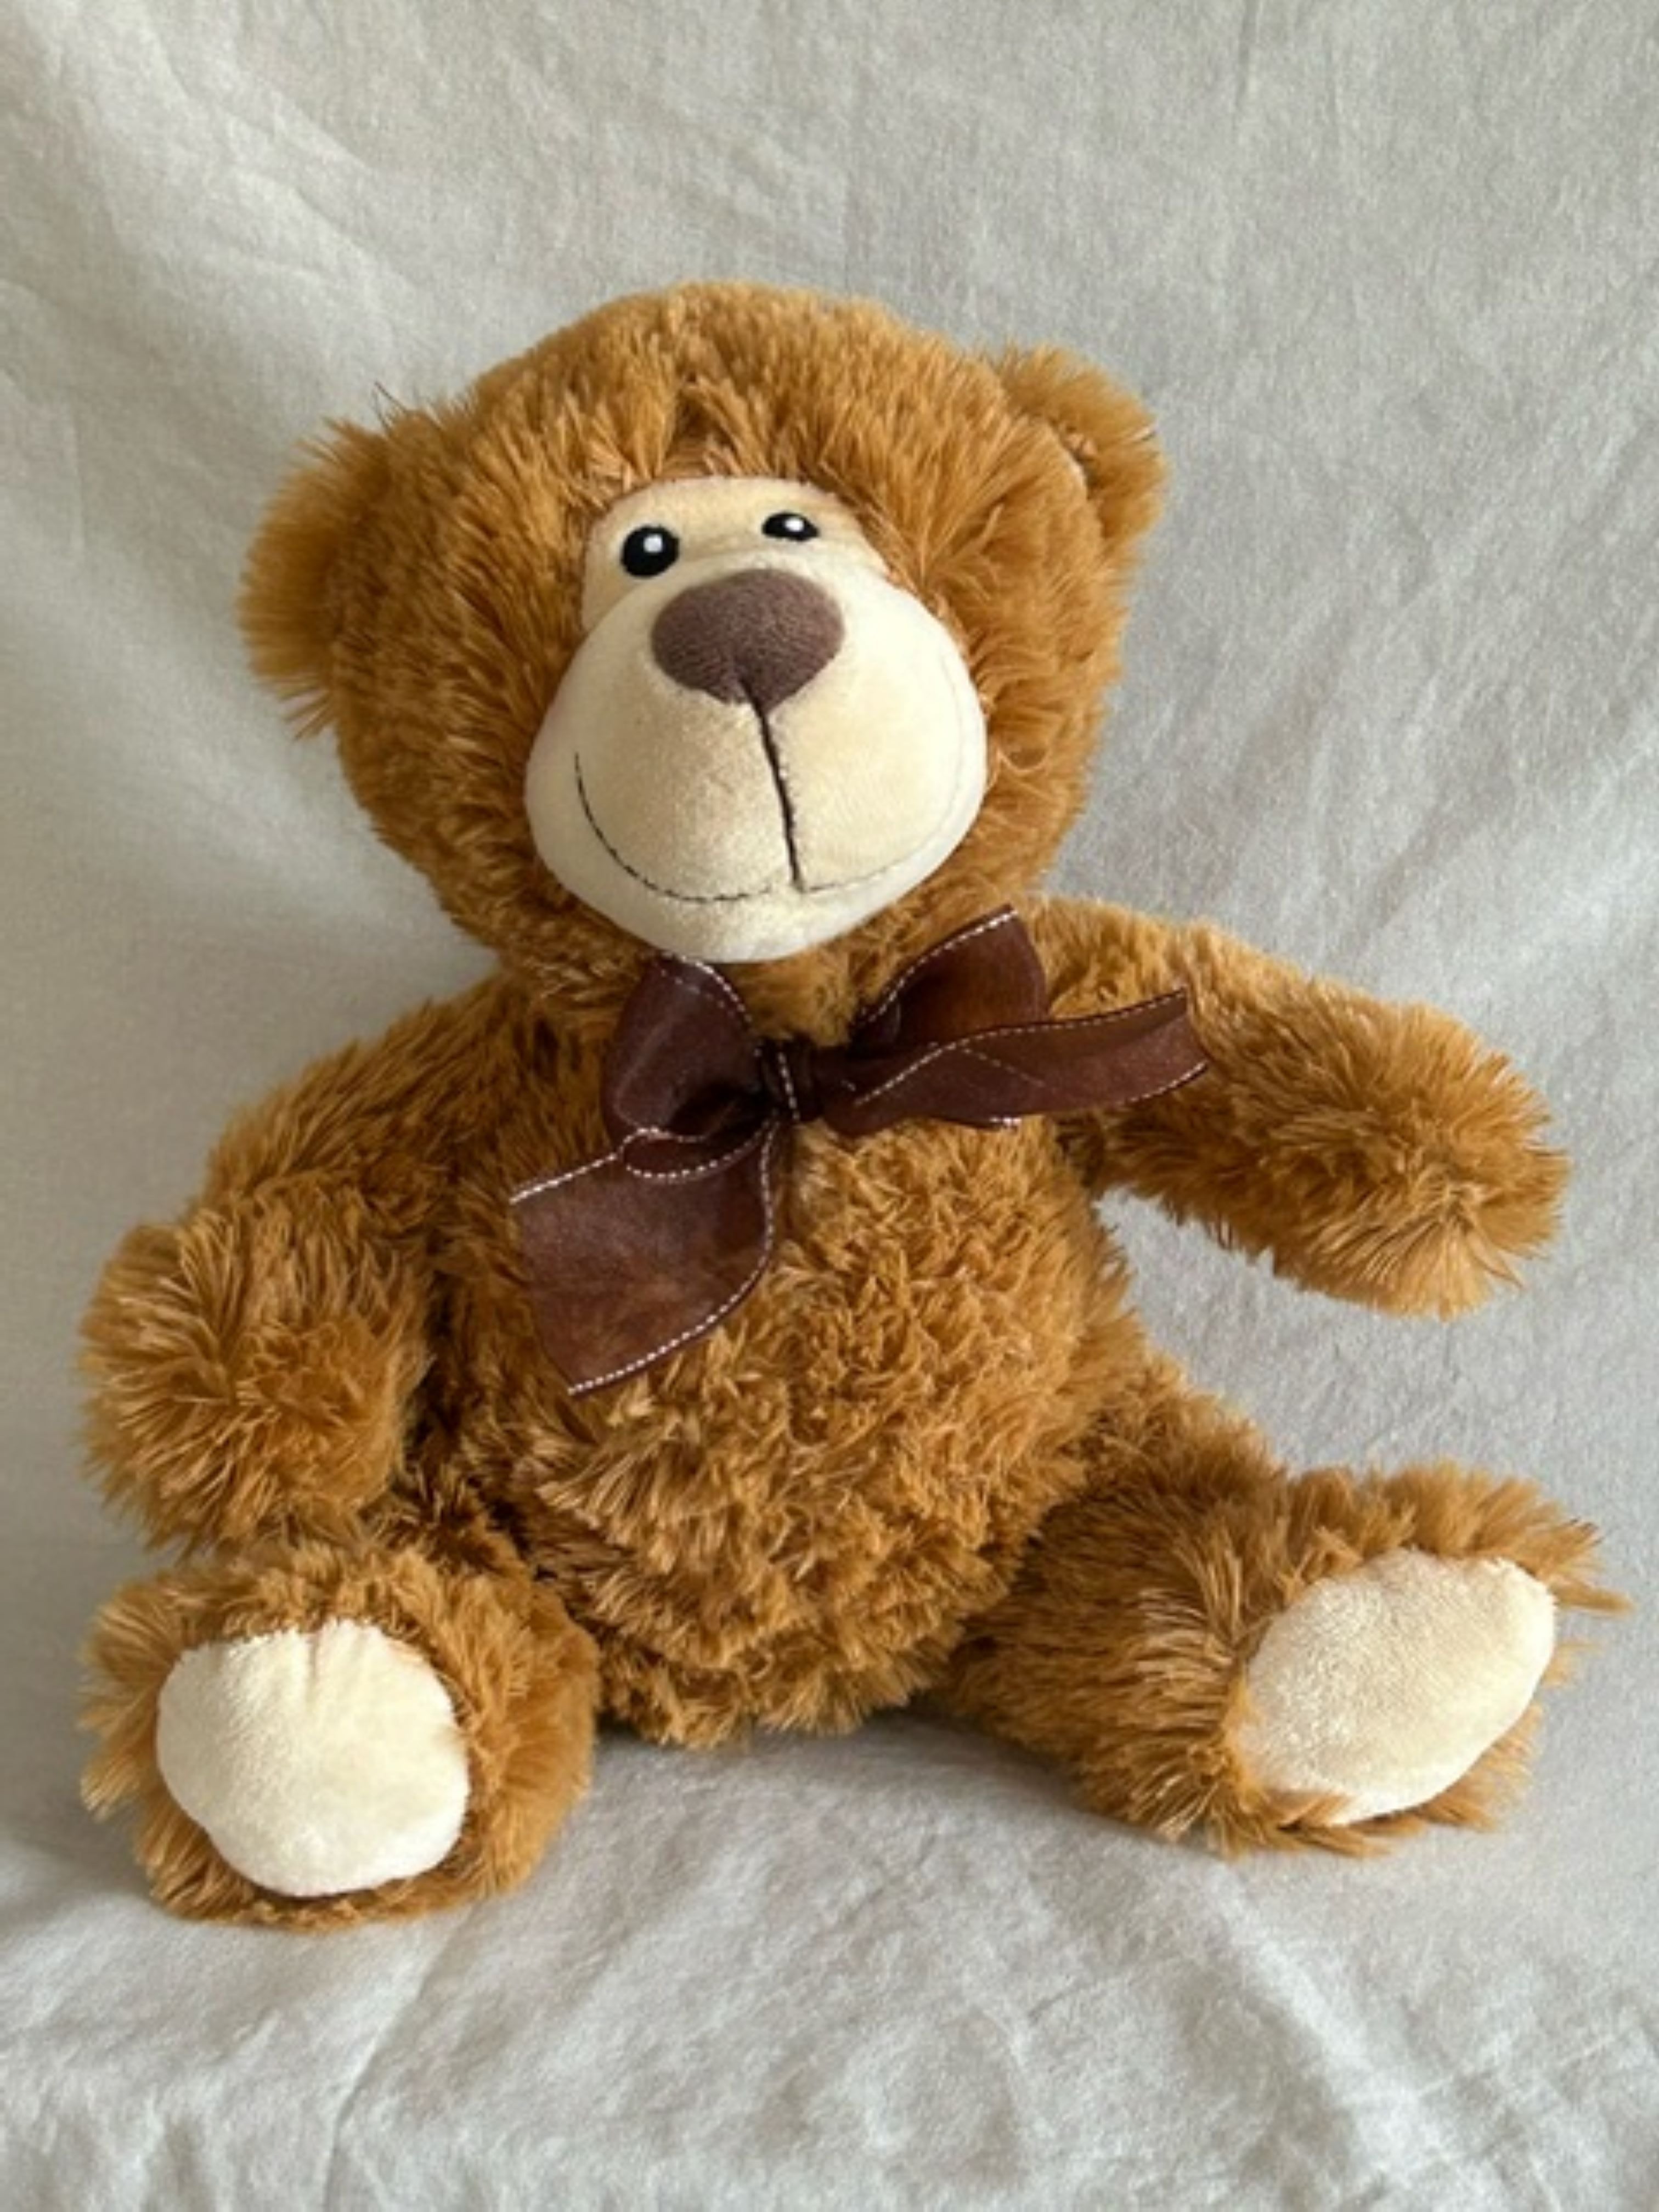 Bow Tie Soft & Premium Coffee Brown Big Teddy Bear- Available in Multiple  Sizes - WallMantra